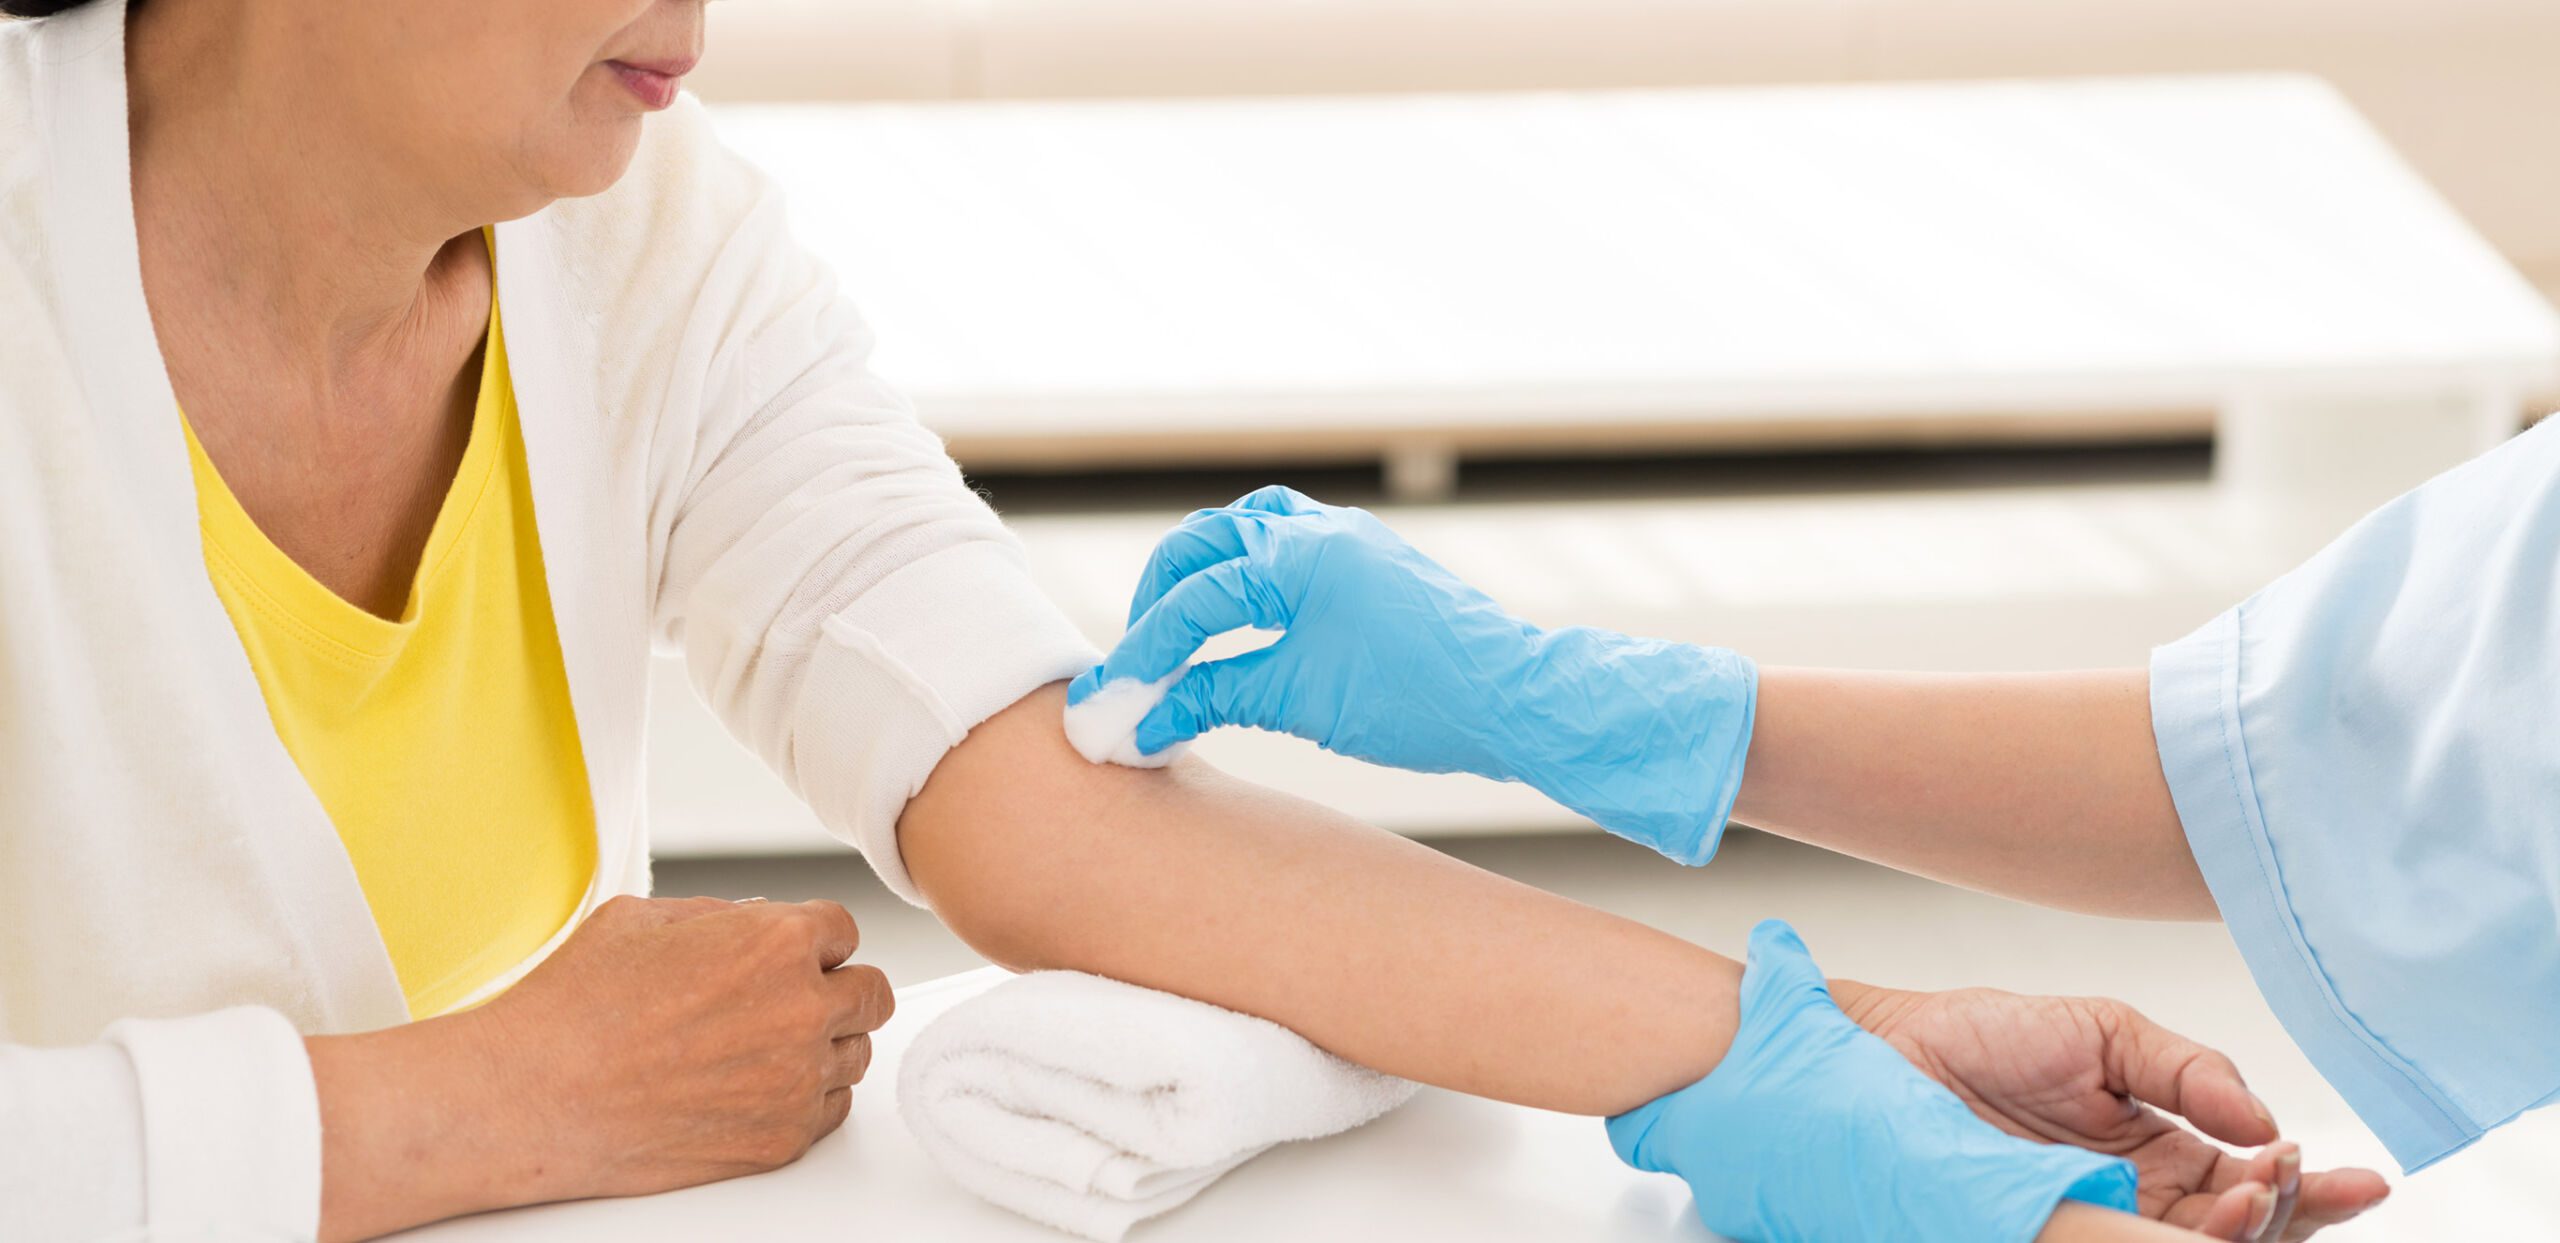 Technician prepares patient arm for blood draw at an anticoagulation clinic, Cooley Dickinson Medical Group Hampshire Cardiovascular Associates, Northampton, MA 01060.